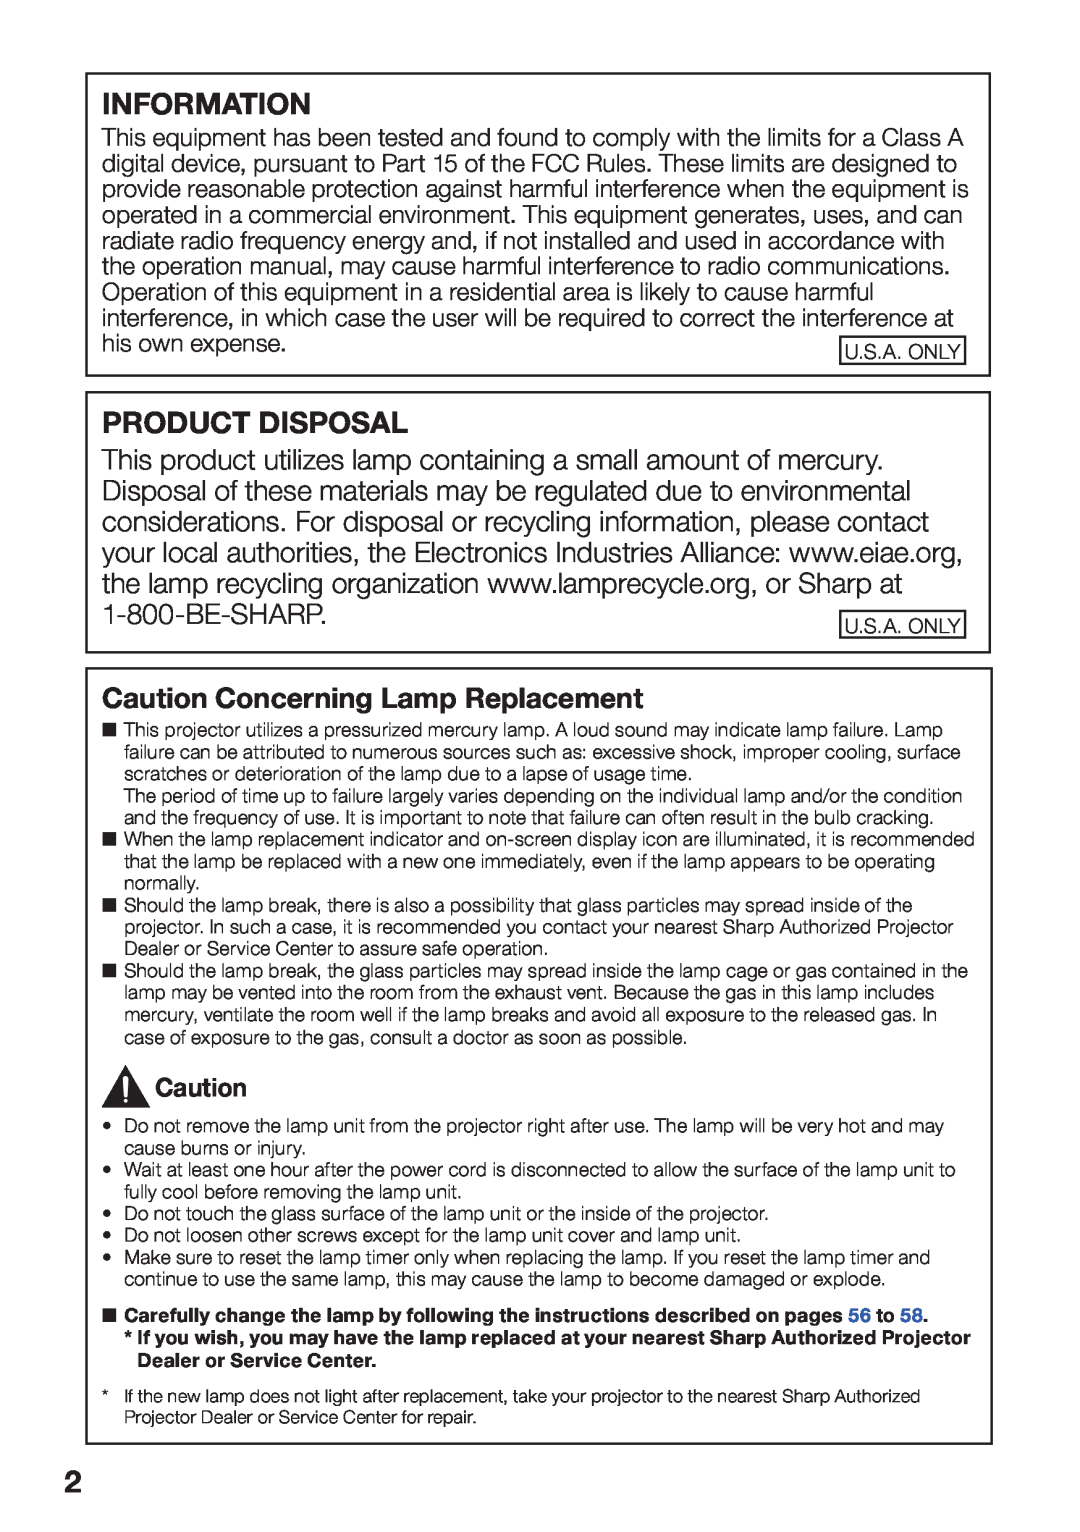 Sharp PG-LX2000, PG-LS2000 appendix Information, Product Disposal, Caution Concerning Lamp Replacement 